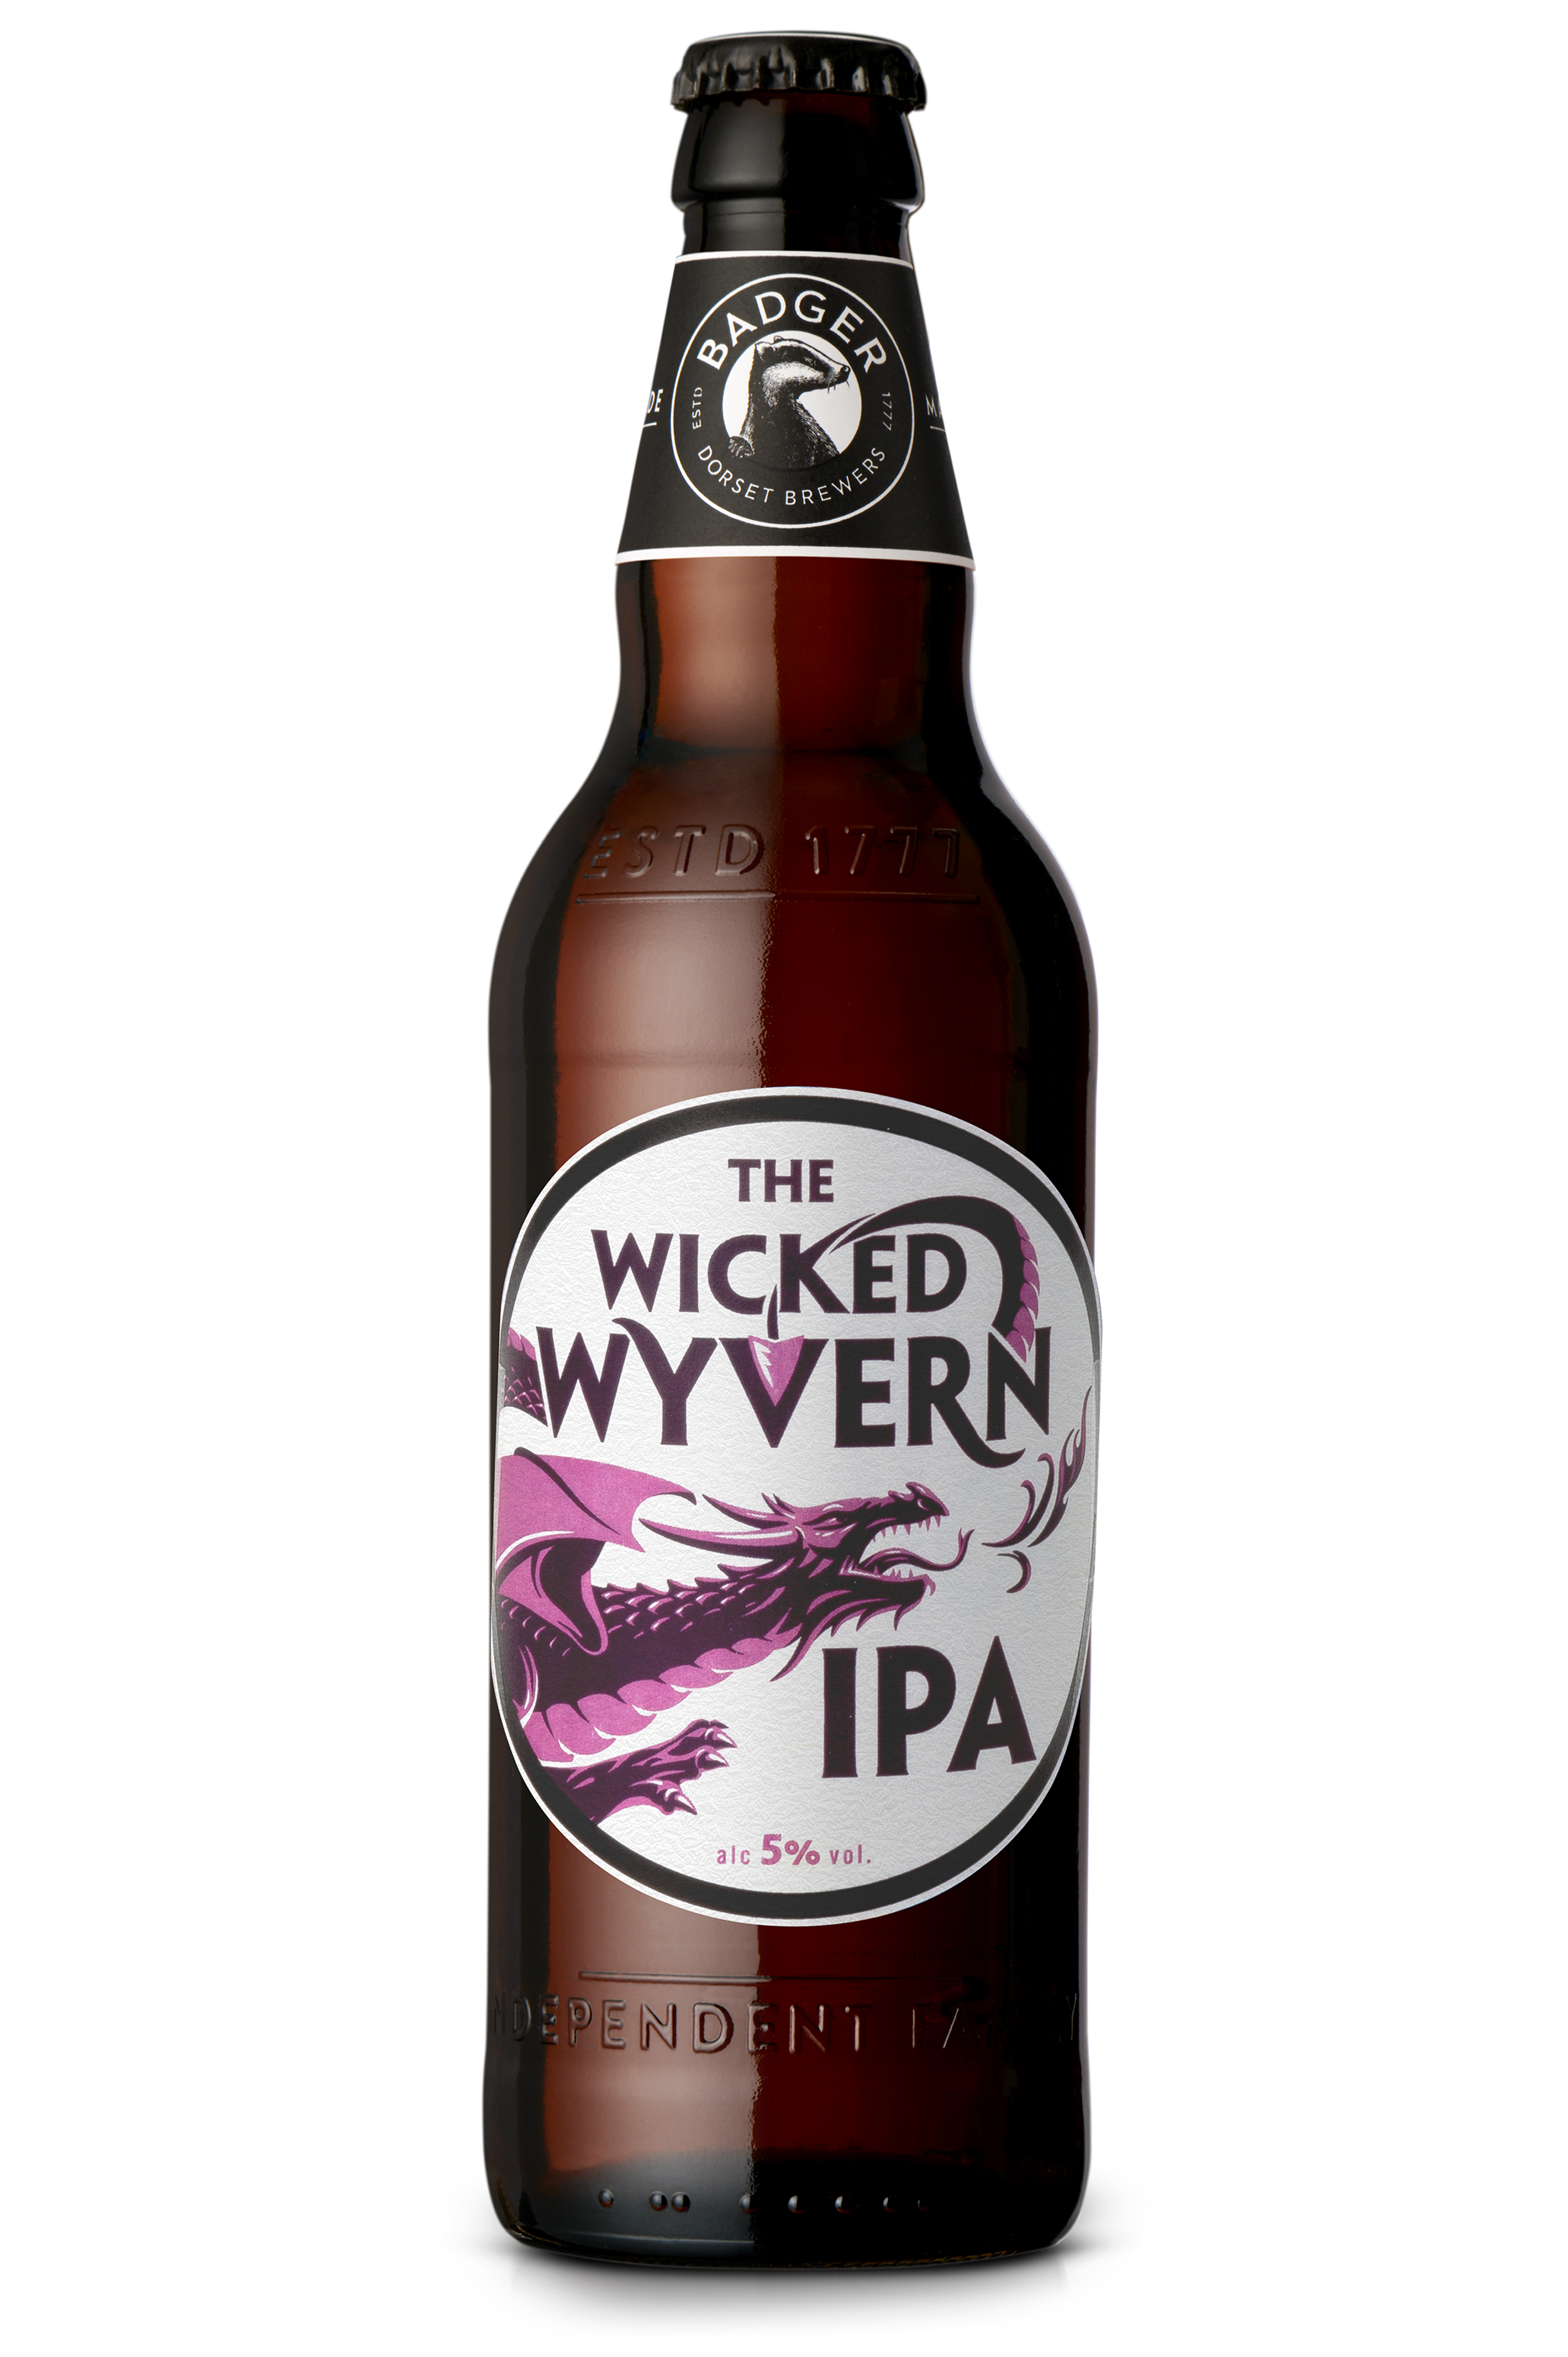 The Wicked Wyvern